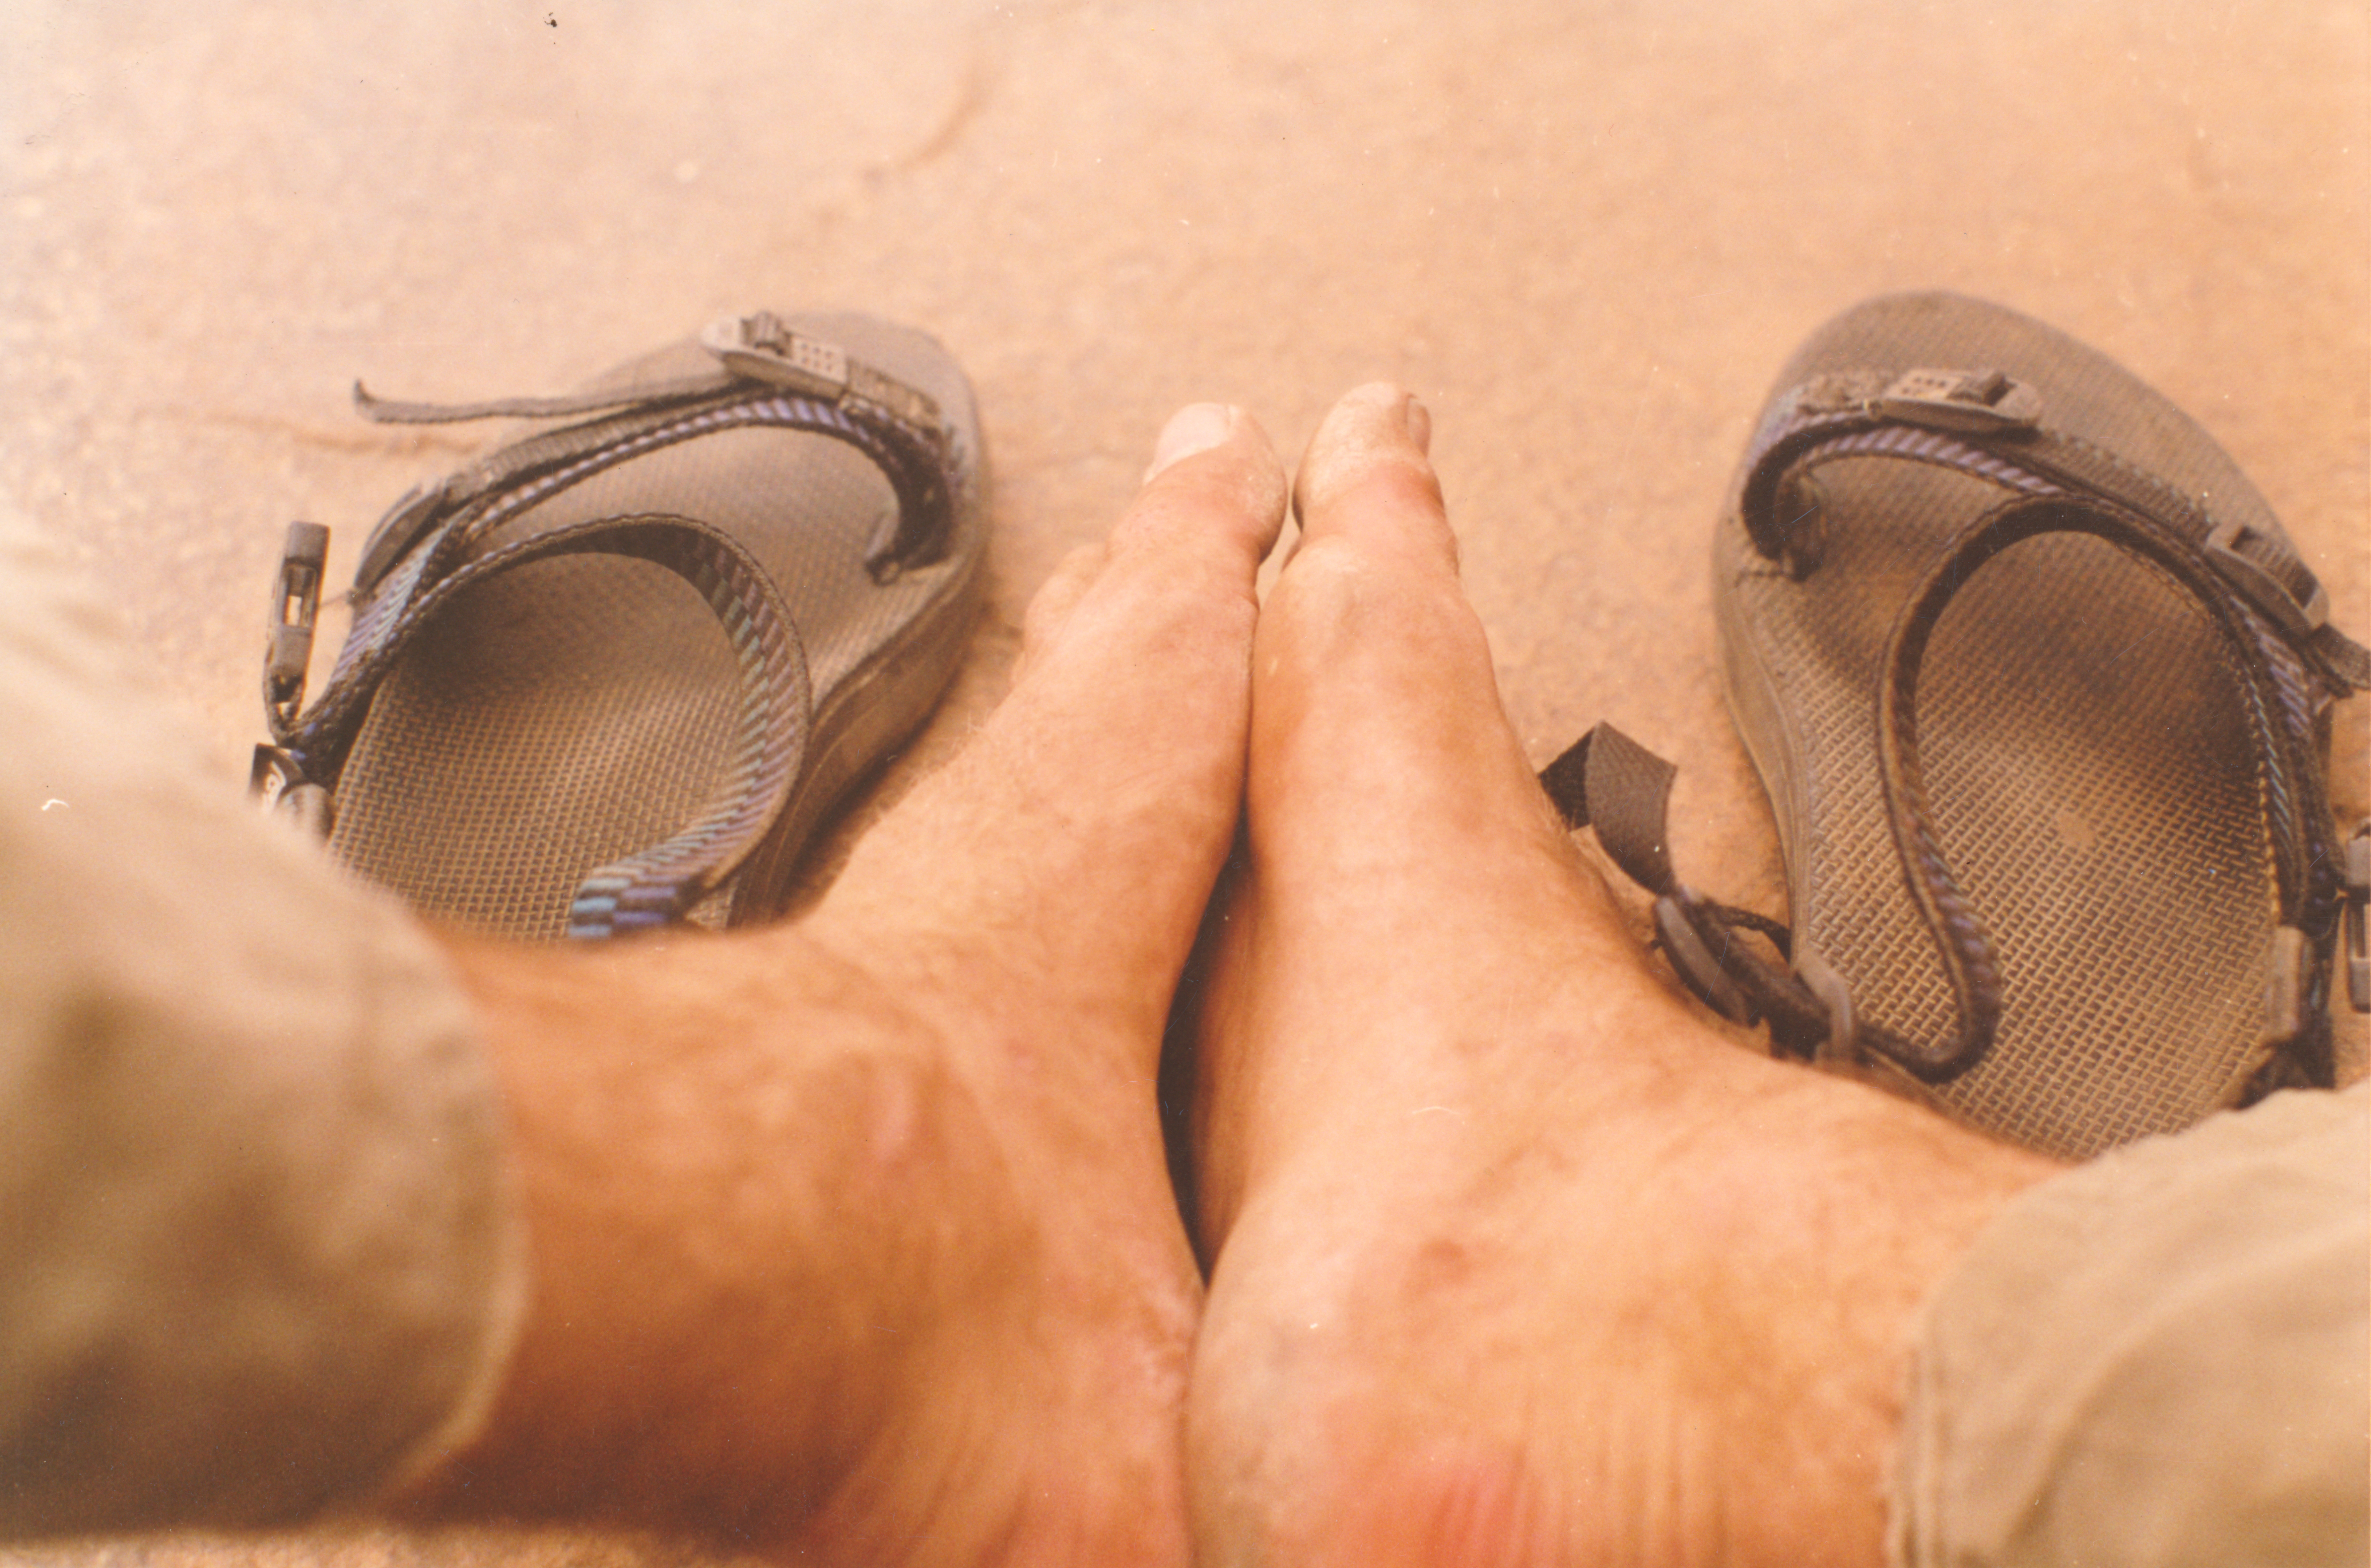 My feet after a hike: dry, calloused, and blistered.